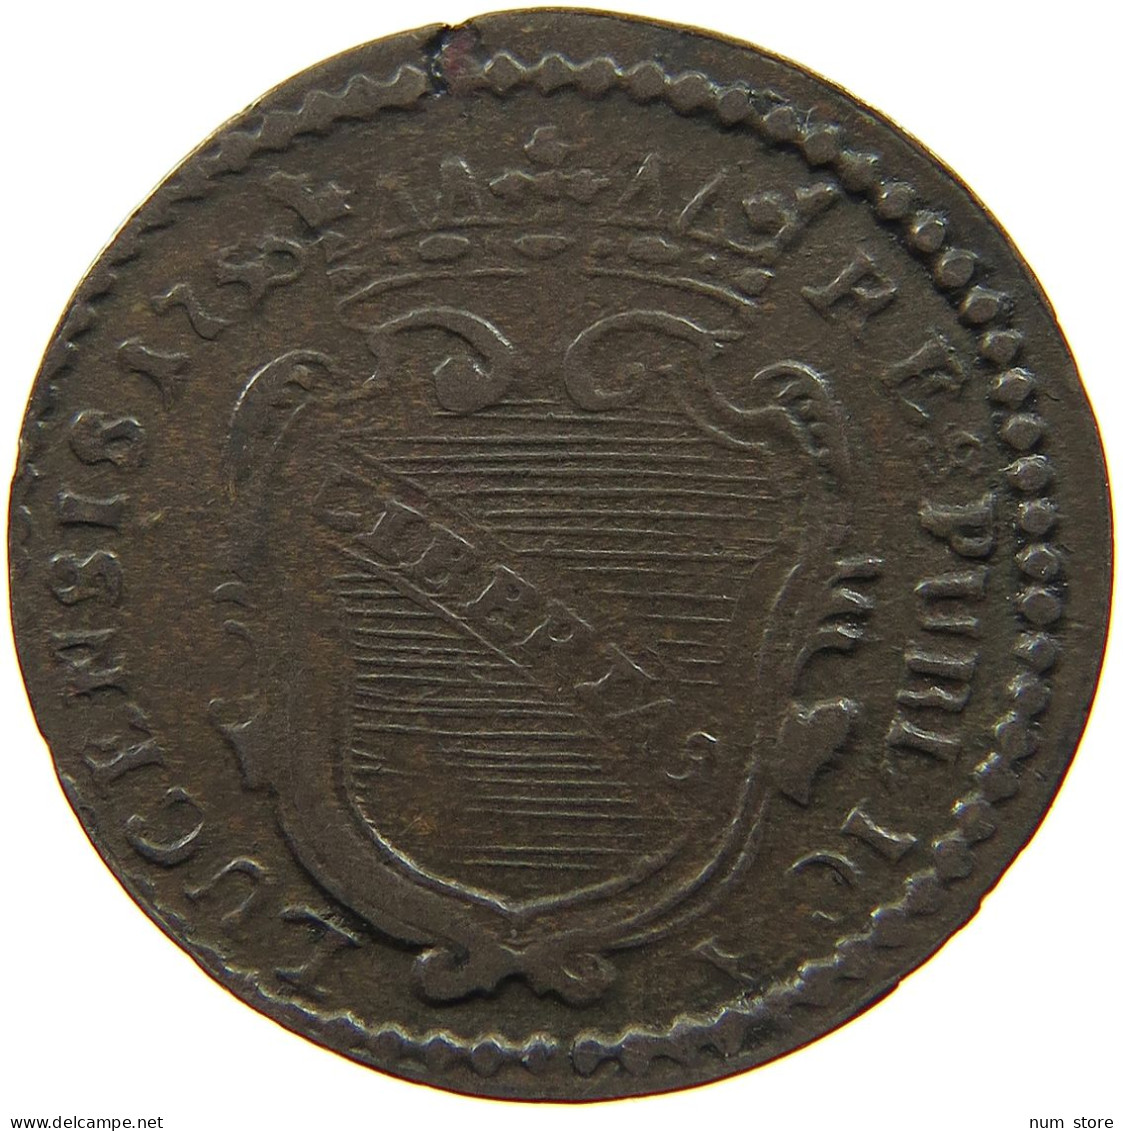 ITALY STATES LUCCA SOLDO 1756  #t060 0411 - Lucca